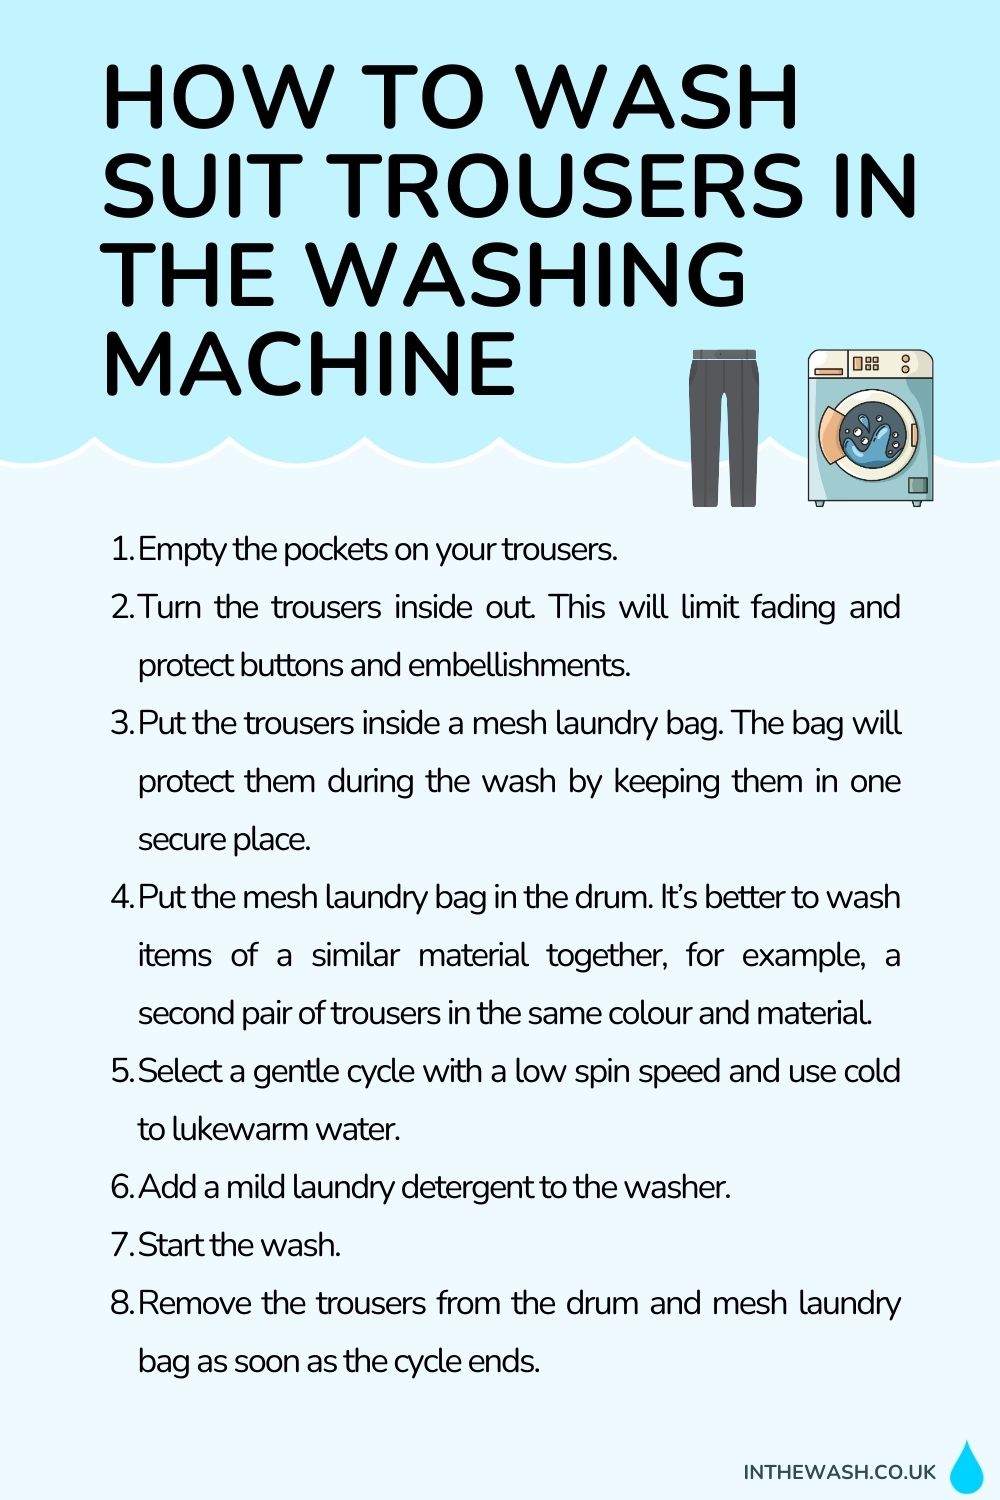 How to wash suit trousers in the washing machine